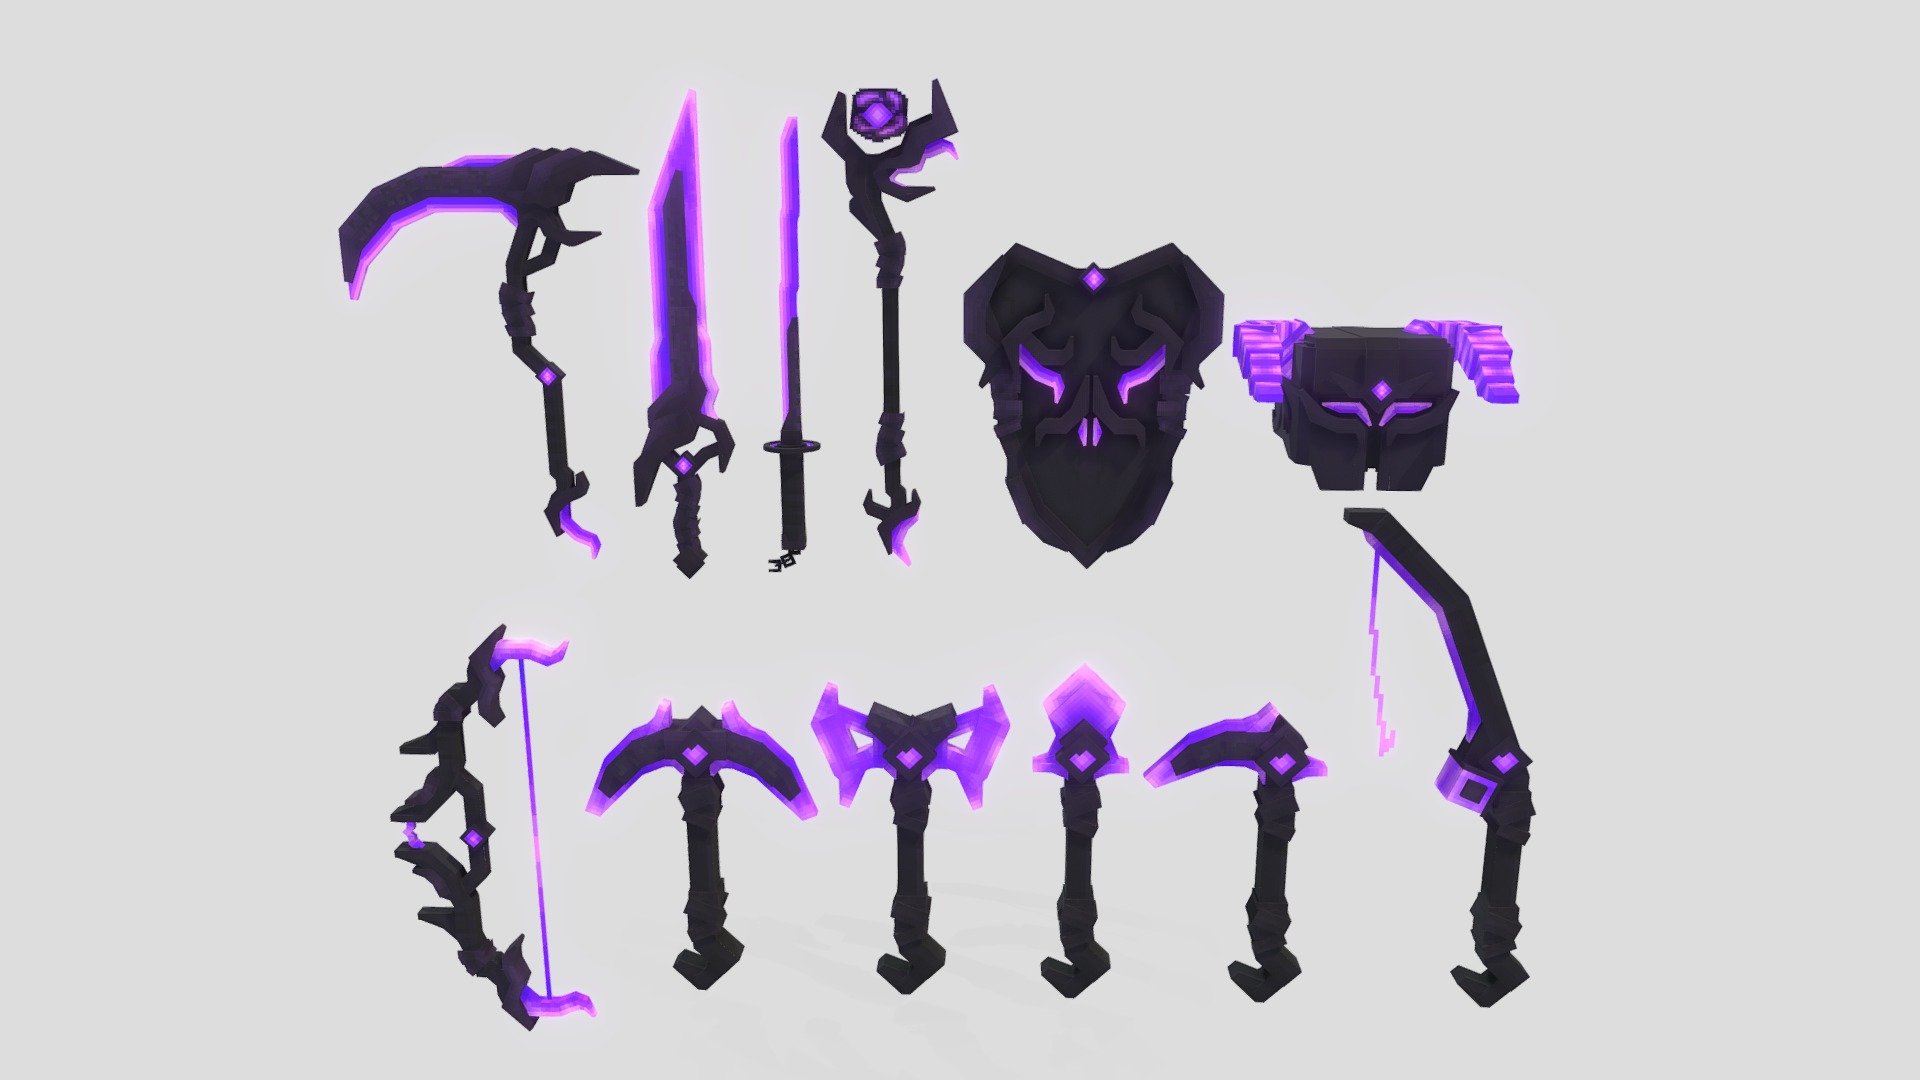 This model is the Chaos Darkness model set, which has many weapon and tool, and for Weapon, I have also added animation to the weapon, which, if a friend buys this model, will receive the .Zip file that I have prepared, which consists of the model and texture of every device, and I have made the purple part of every device glow. Thank you.  




Options : Helmet,Shield,Sword,Katana,Scythe,Staff,Bow,Pickaxe,Axe,Shovel.Hoe,Fishing_rod

Animation : yes for Sword,Katana,Scythe,Staff

Requires Optifine : yes

Java/Bedrock : Java

minecraft : 1.19.2 and older.

File formats included : JSON, OTHER, PNG

https://youtu.be/clcQwhmlLY0
 - (Recommend) [ MC ] Item : Chaos Darkness - Buy Royalty Free 3D model by iJUNE 3d model